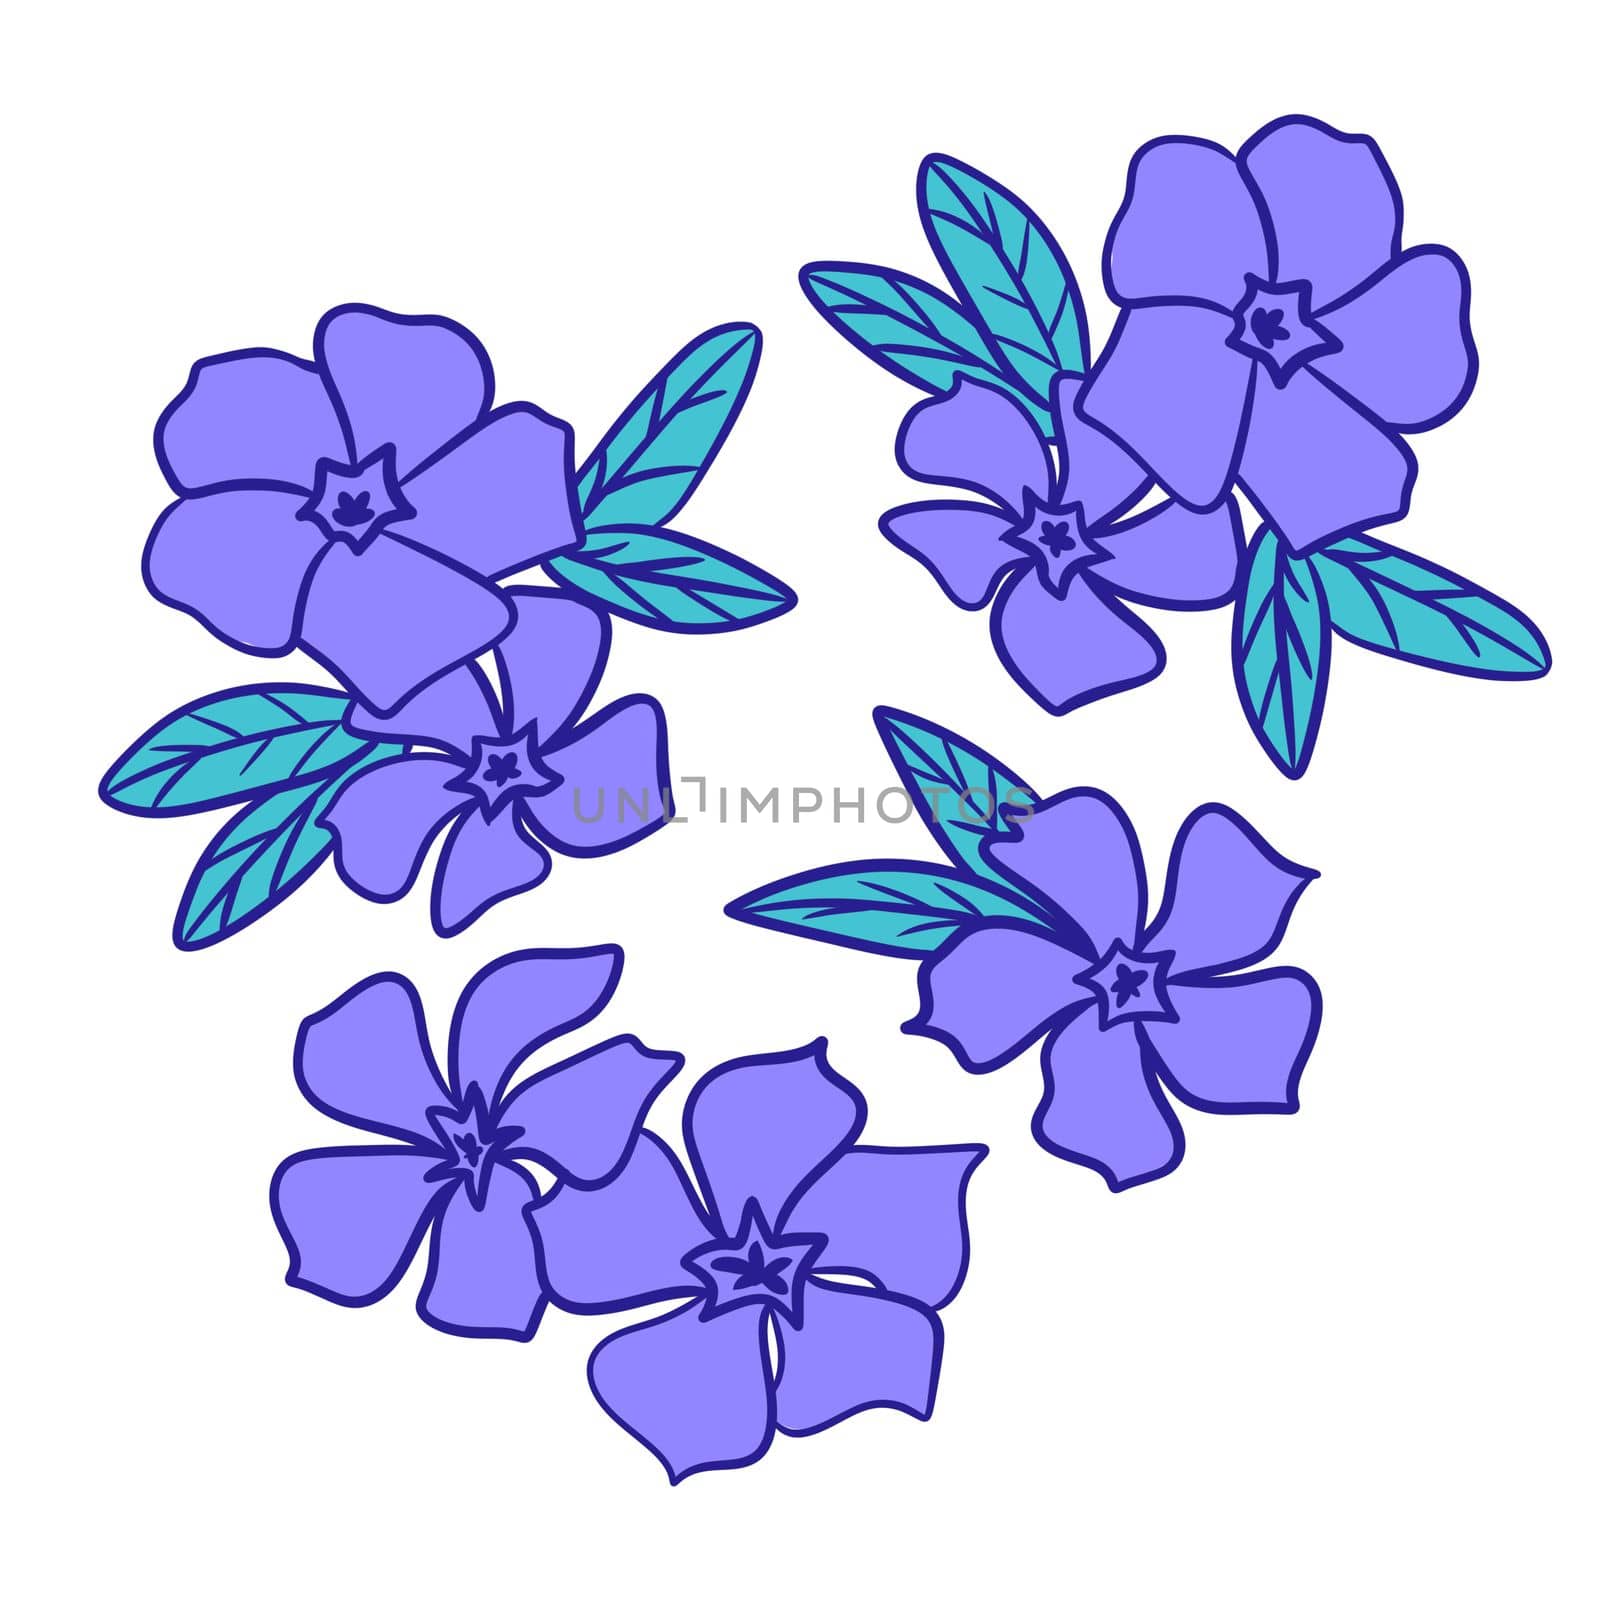 Hand drawn illustration of periwinkle blue violet flowers with green leaves. Natural wild forest flowers in floral decorative style, wood woodland nature plant, bloom blossom drawing leaf foliage. by Lagmar